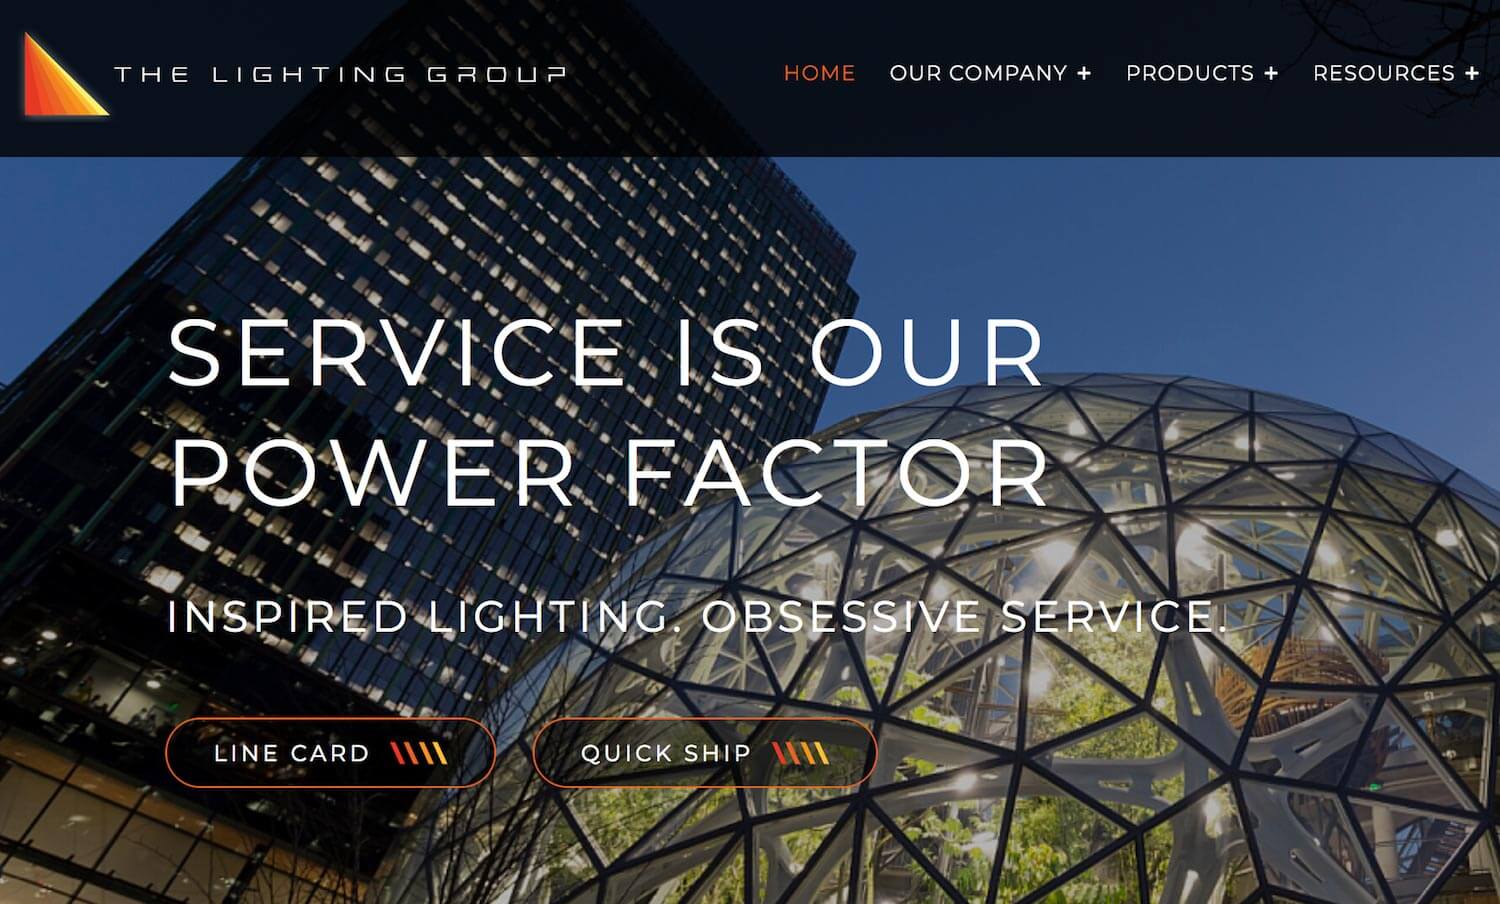 The Lighting Group Website with Copy by April May June